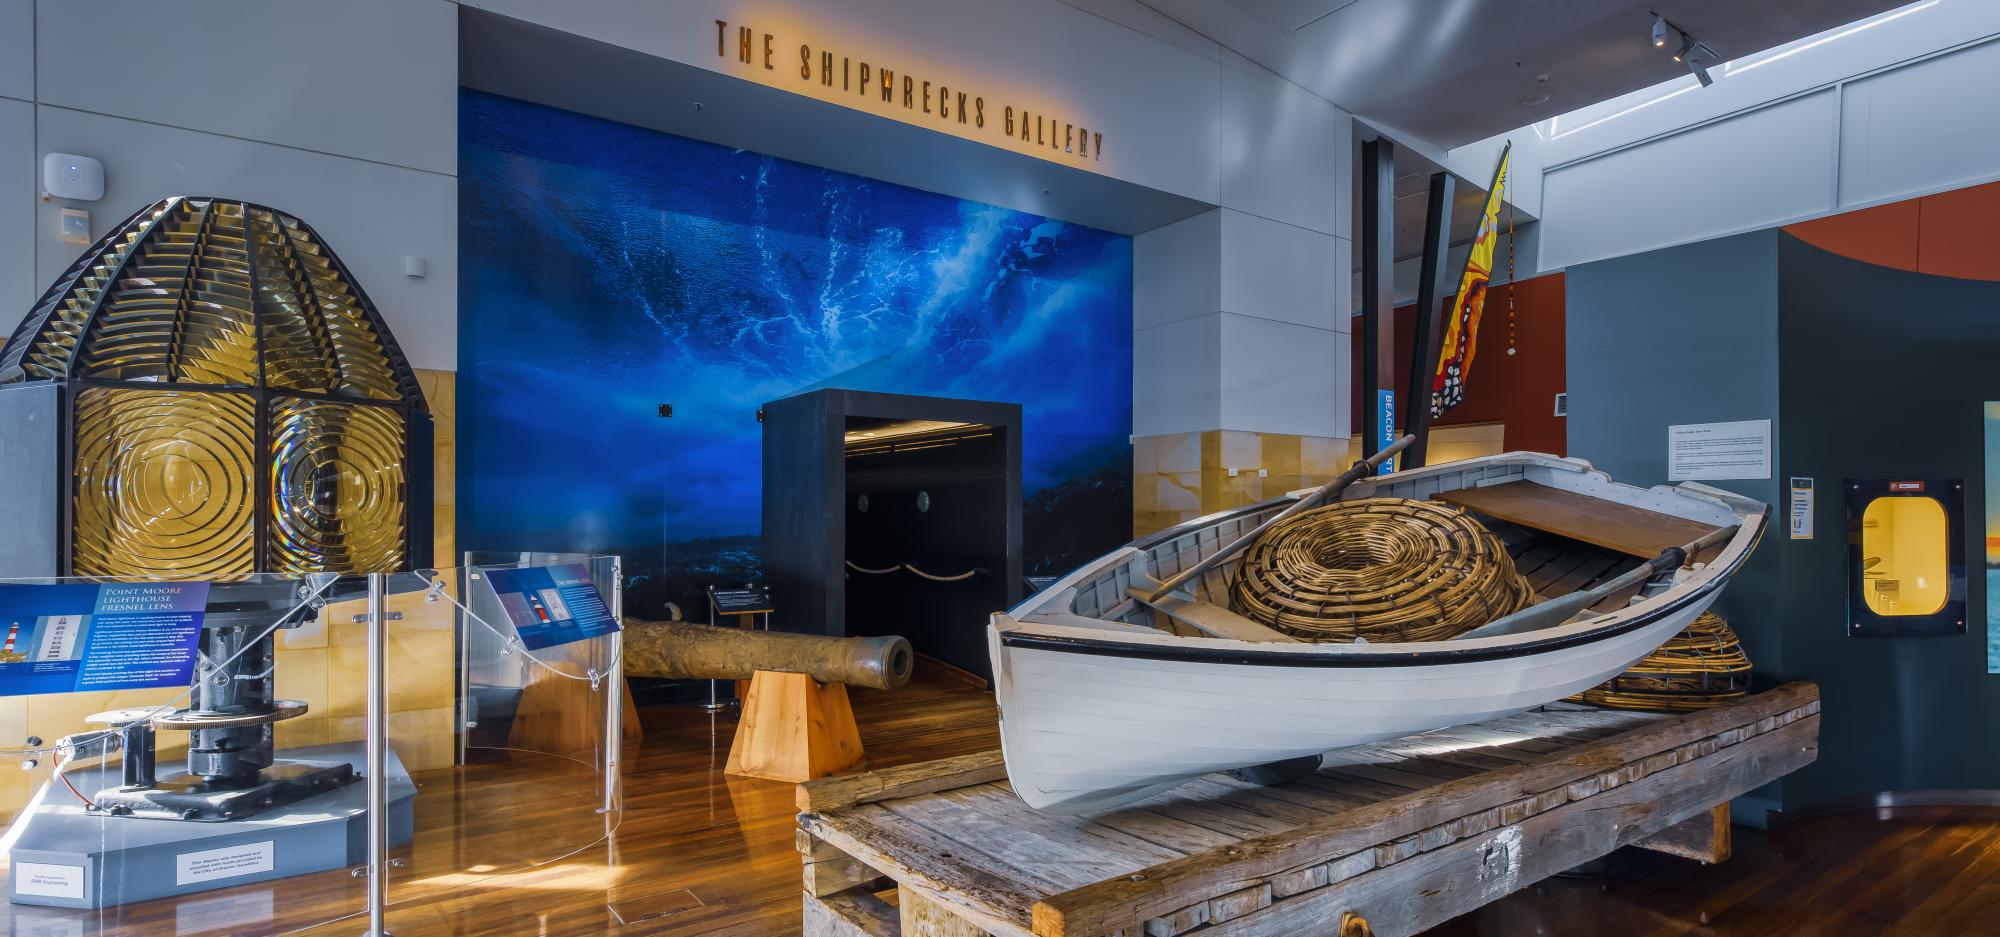 A museum gallery displaying various boating related objects